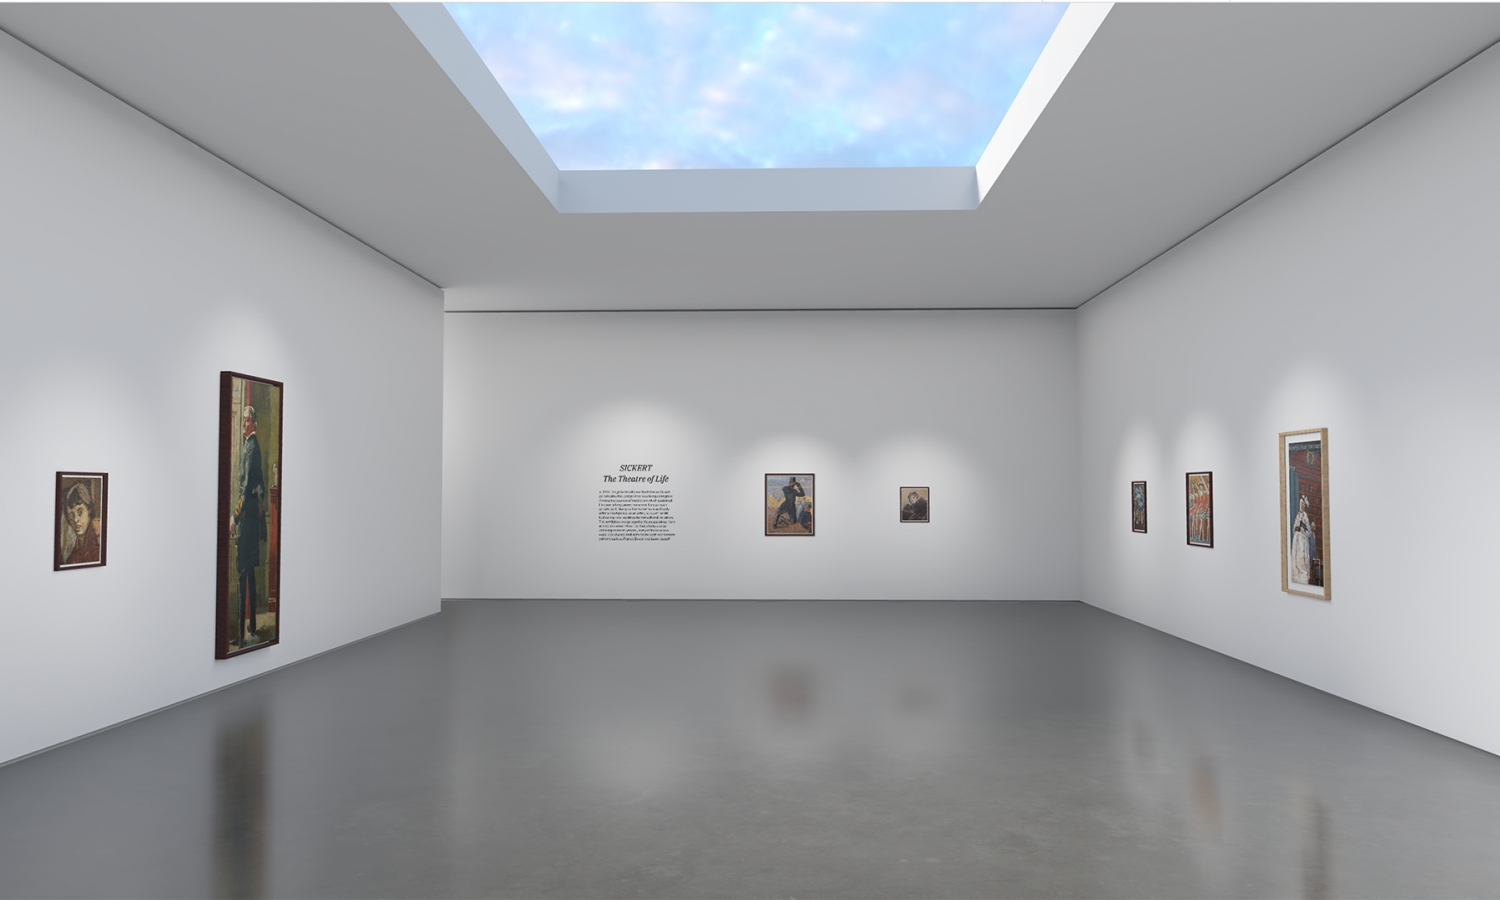 Images shows a Sickert exhibition installed in a virtual gallery space with a skylight showing the open sky